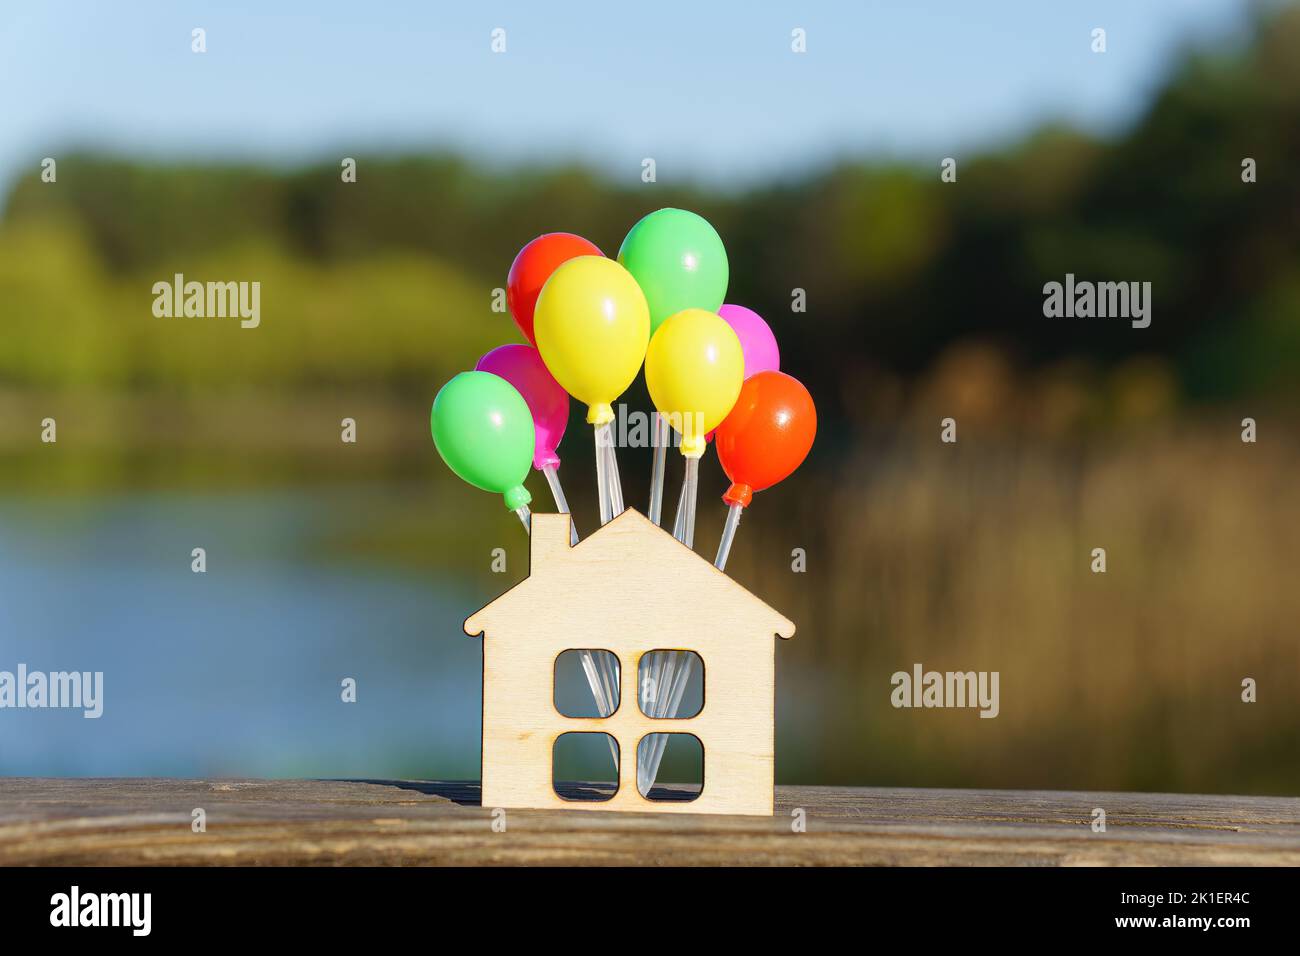 Miniature flat house shape with a bunch of small colorful balloons against a beautiful lake landscape background. Creative moving in party concept. Stock Photo